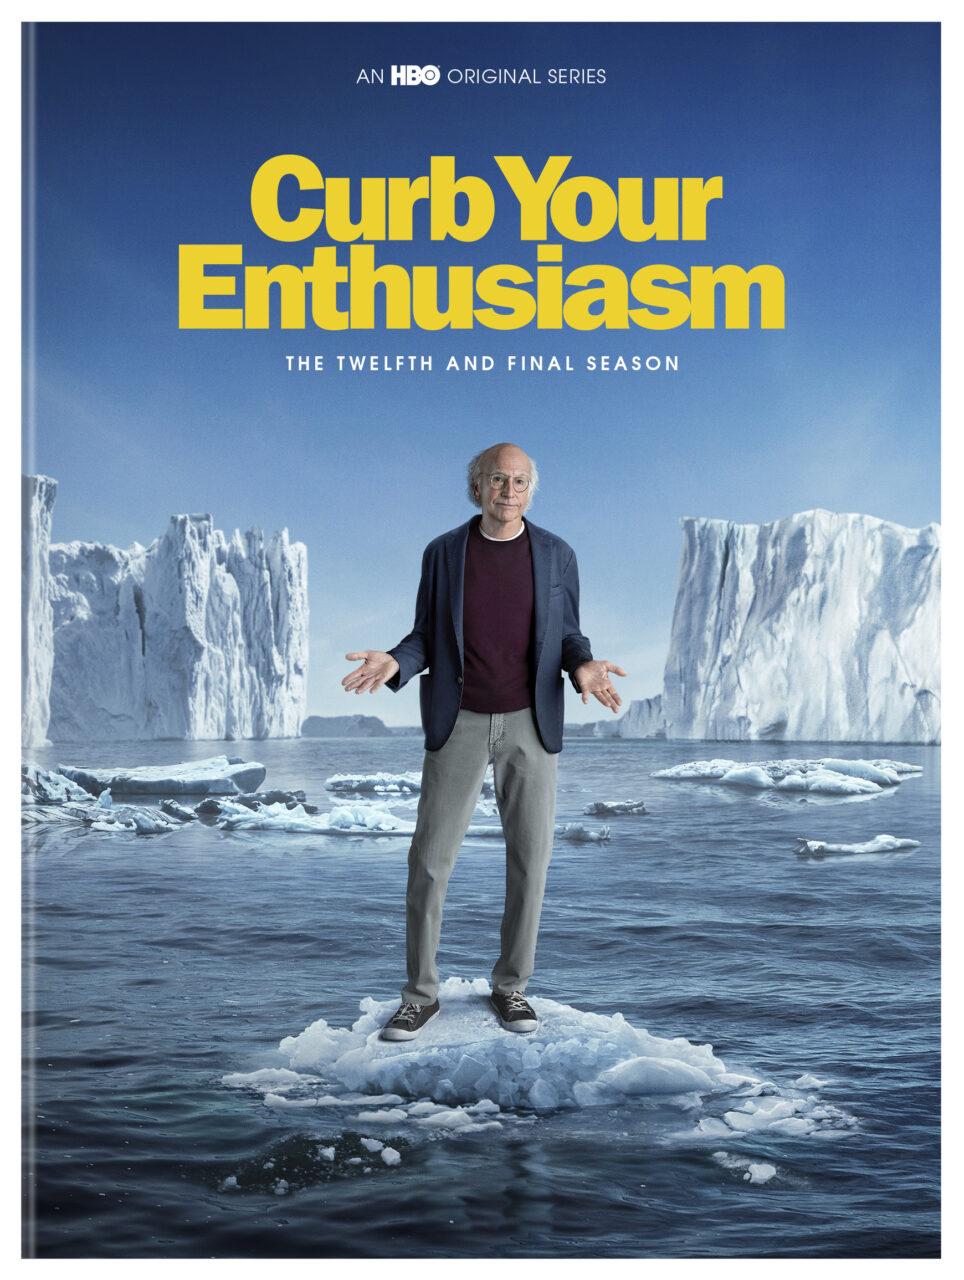 Curb Your Enthusiasm: The Twelfth And Final Season cover (Warner Bros. Discovery Home Entertainment)